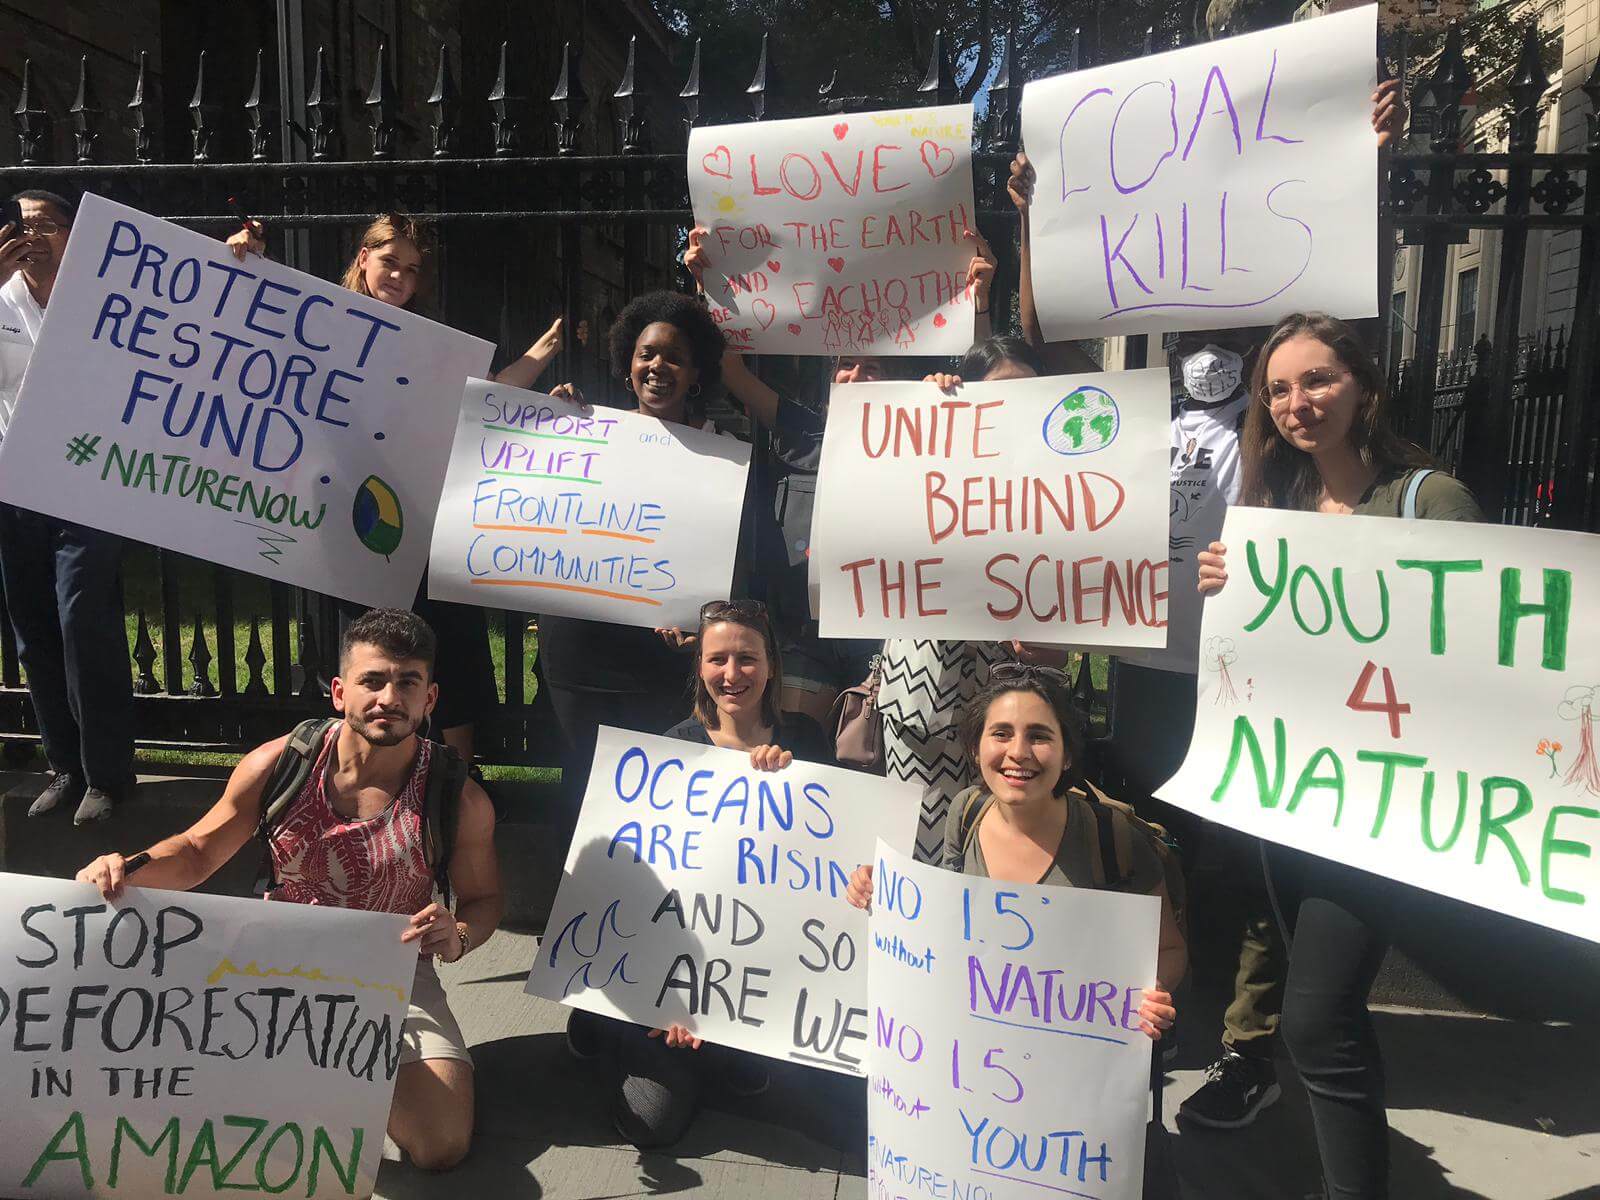 Youth leaders for climate, nature and social justice